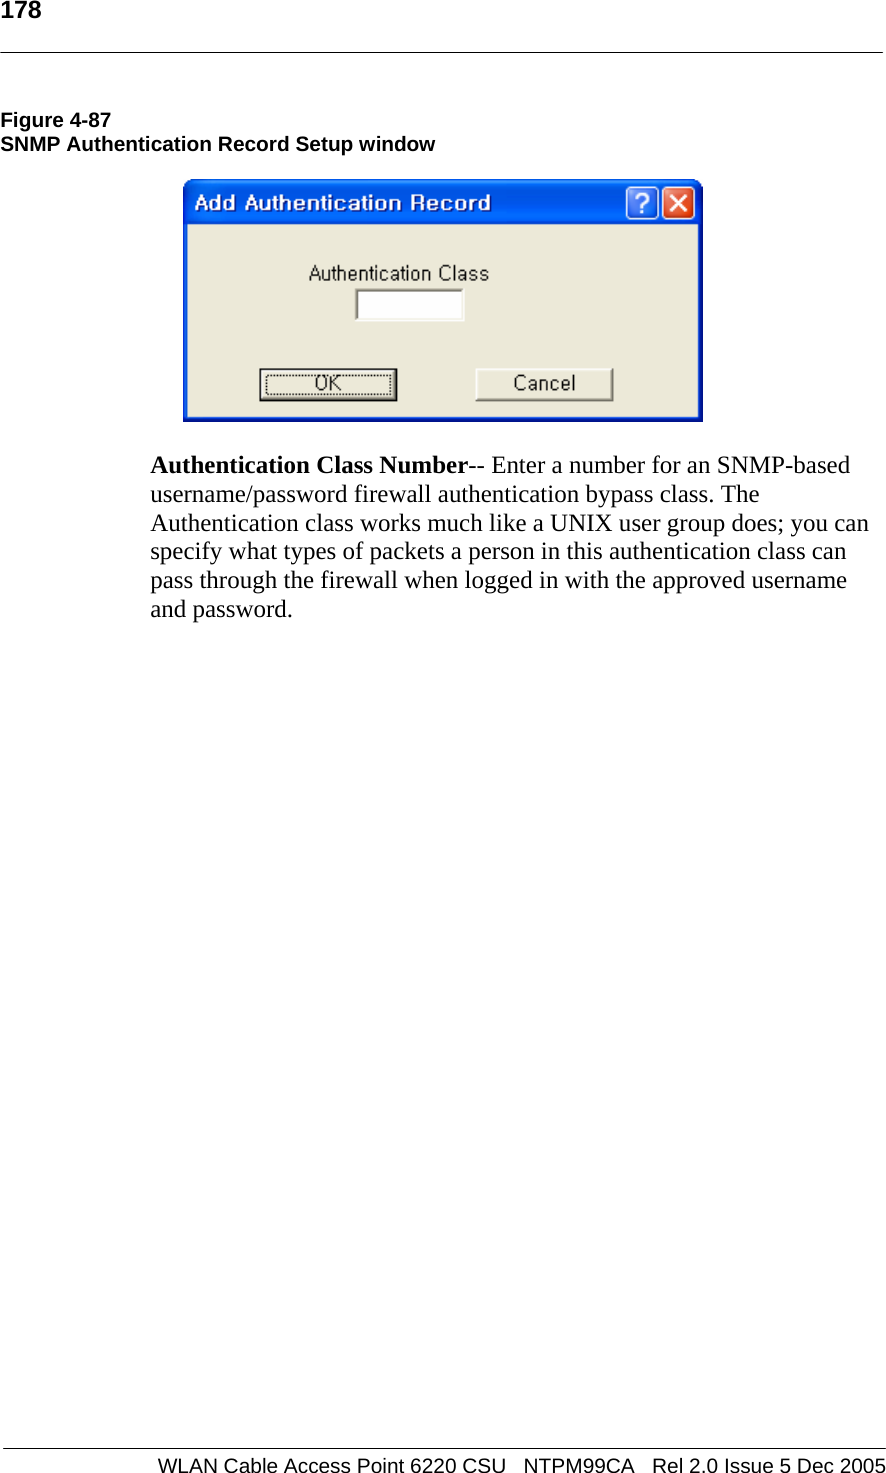   178  WLAN Cable Access Point 6220 CSU   NTPM99CA   Rel 2.0 Issue 5 Dec 2005 Figure 4-87 SNMP Authentication Record Setup window    Authentication Class Number-- Enter a number for an SNMP-based username/password firewall authentication bypass class. The Authentication class works much like a UNIX user group does; you can specify what types of packets a person in this authentication class can pass through the firewall when logged in with the approved username and password.    